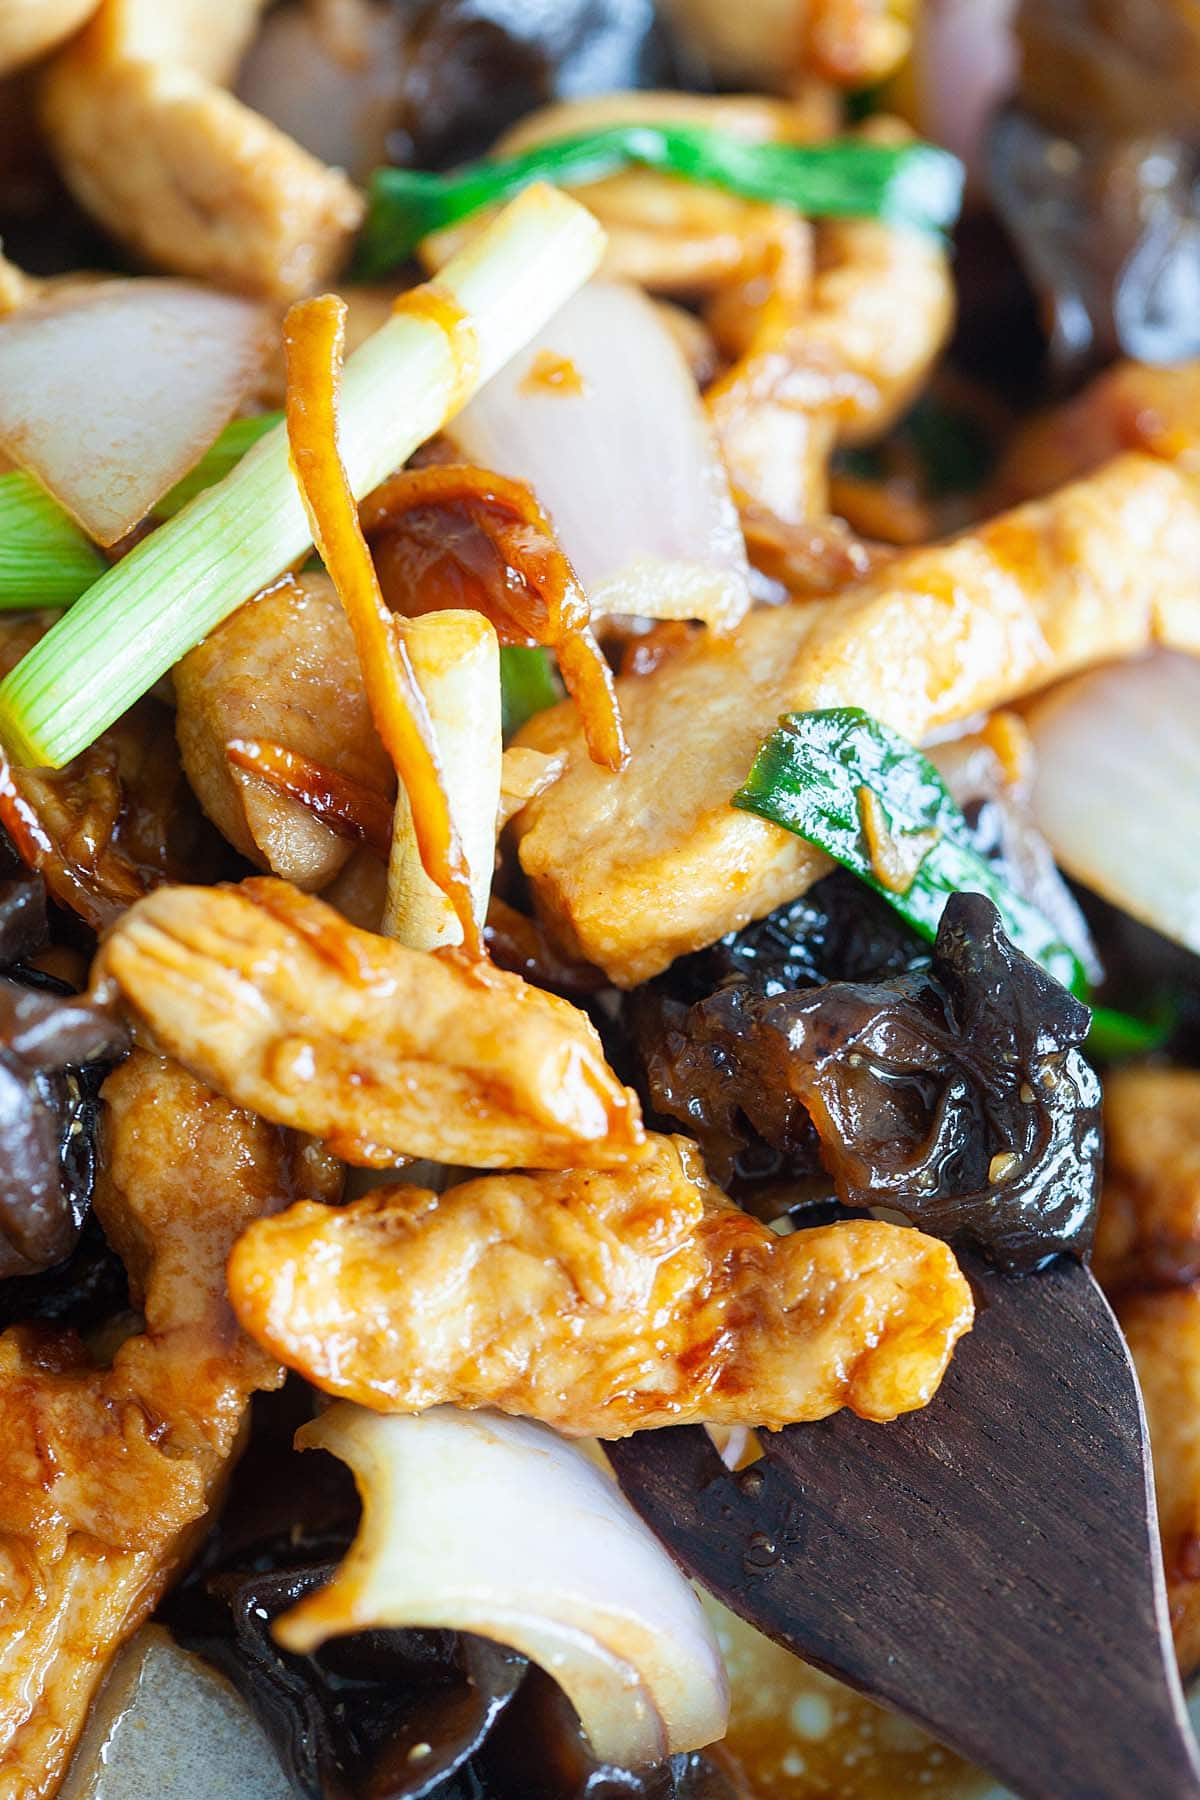 Stir fry chicken with black fungus and ginger, ready to serve.